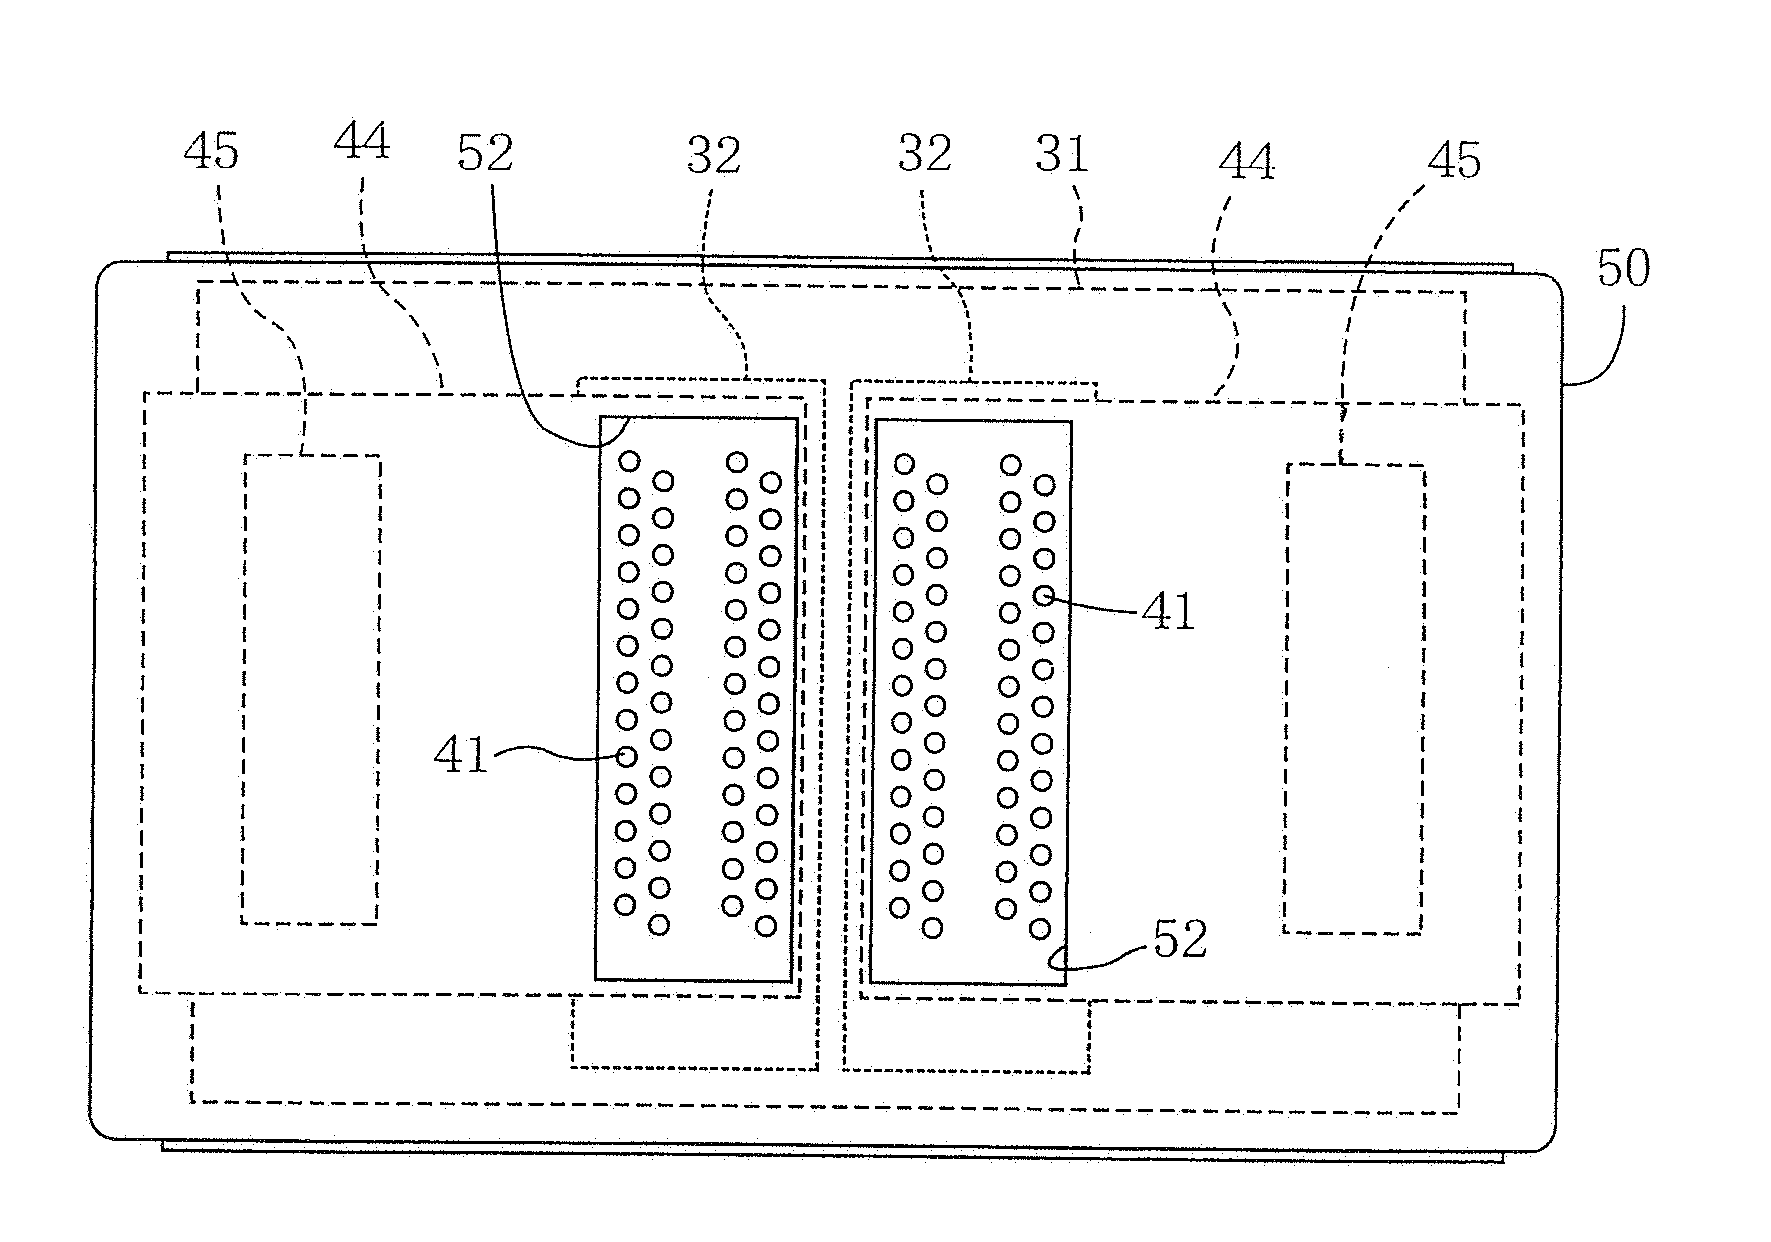 Recording apparatus equipped with heatsink